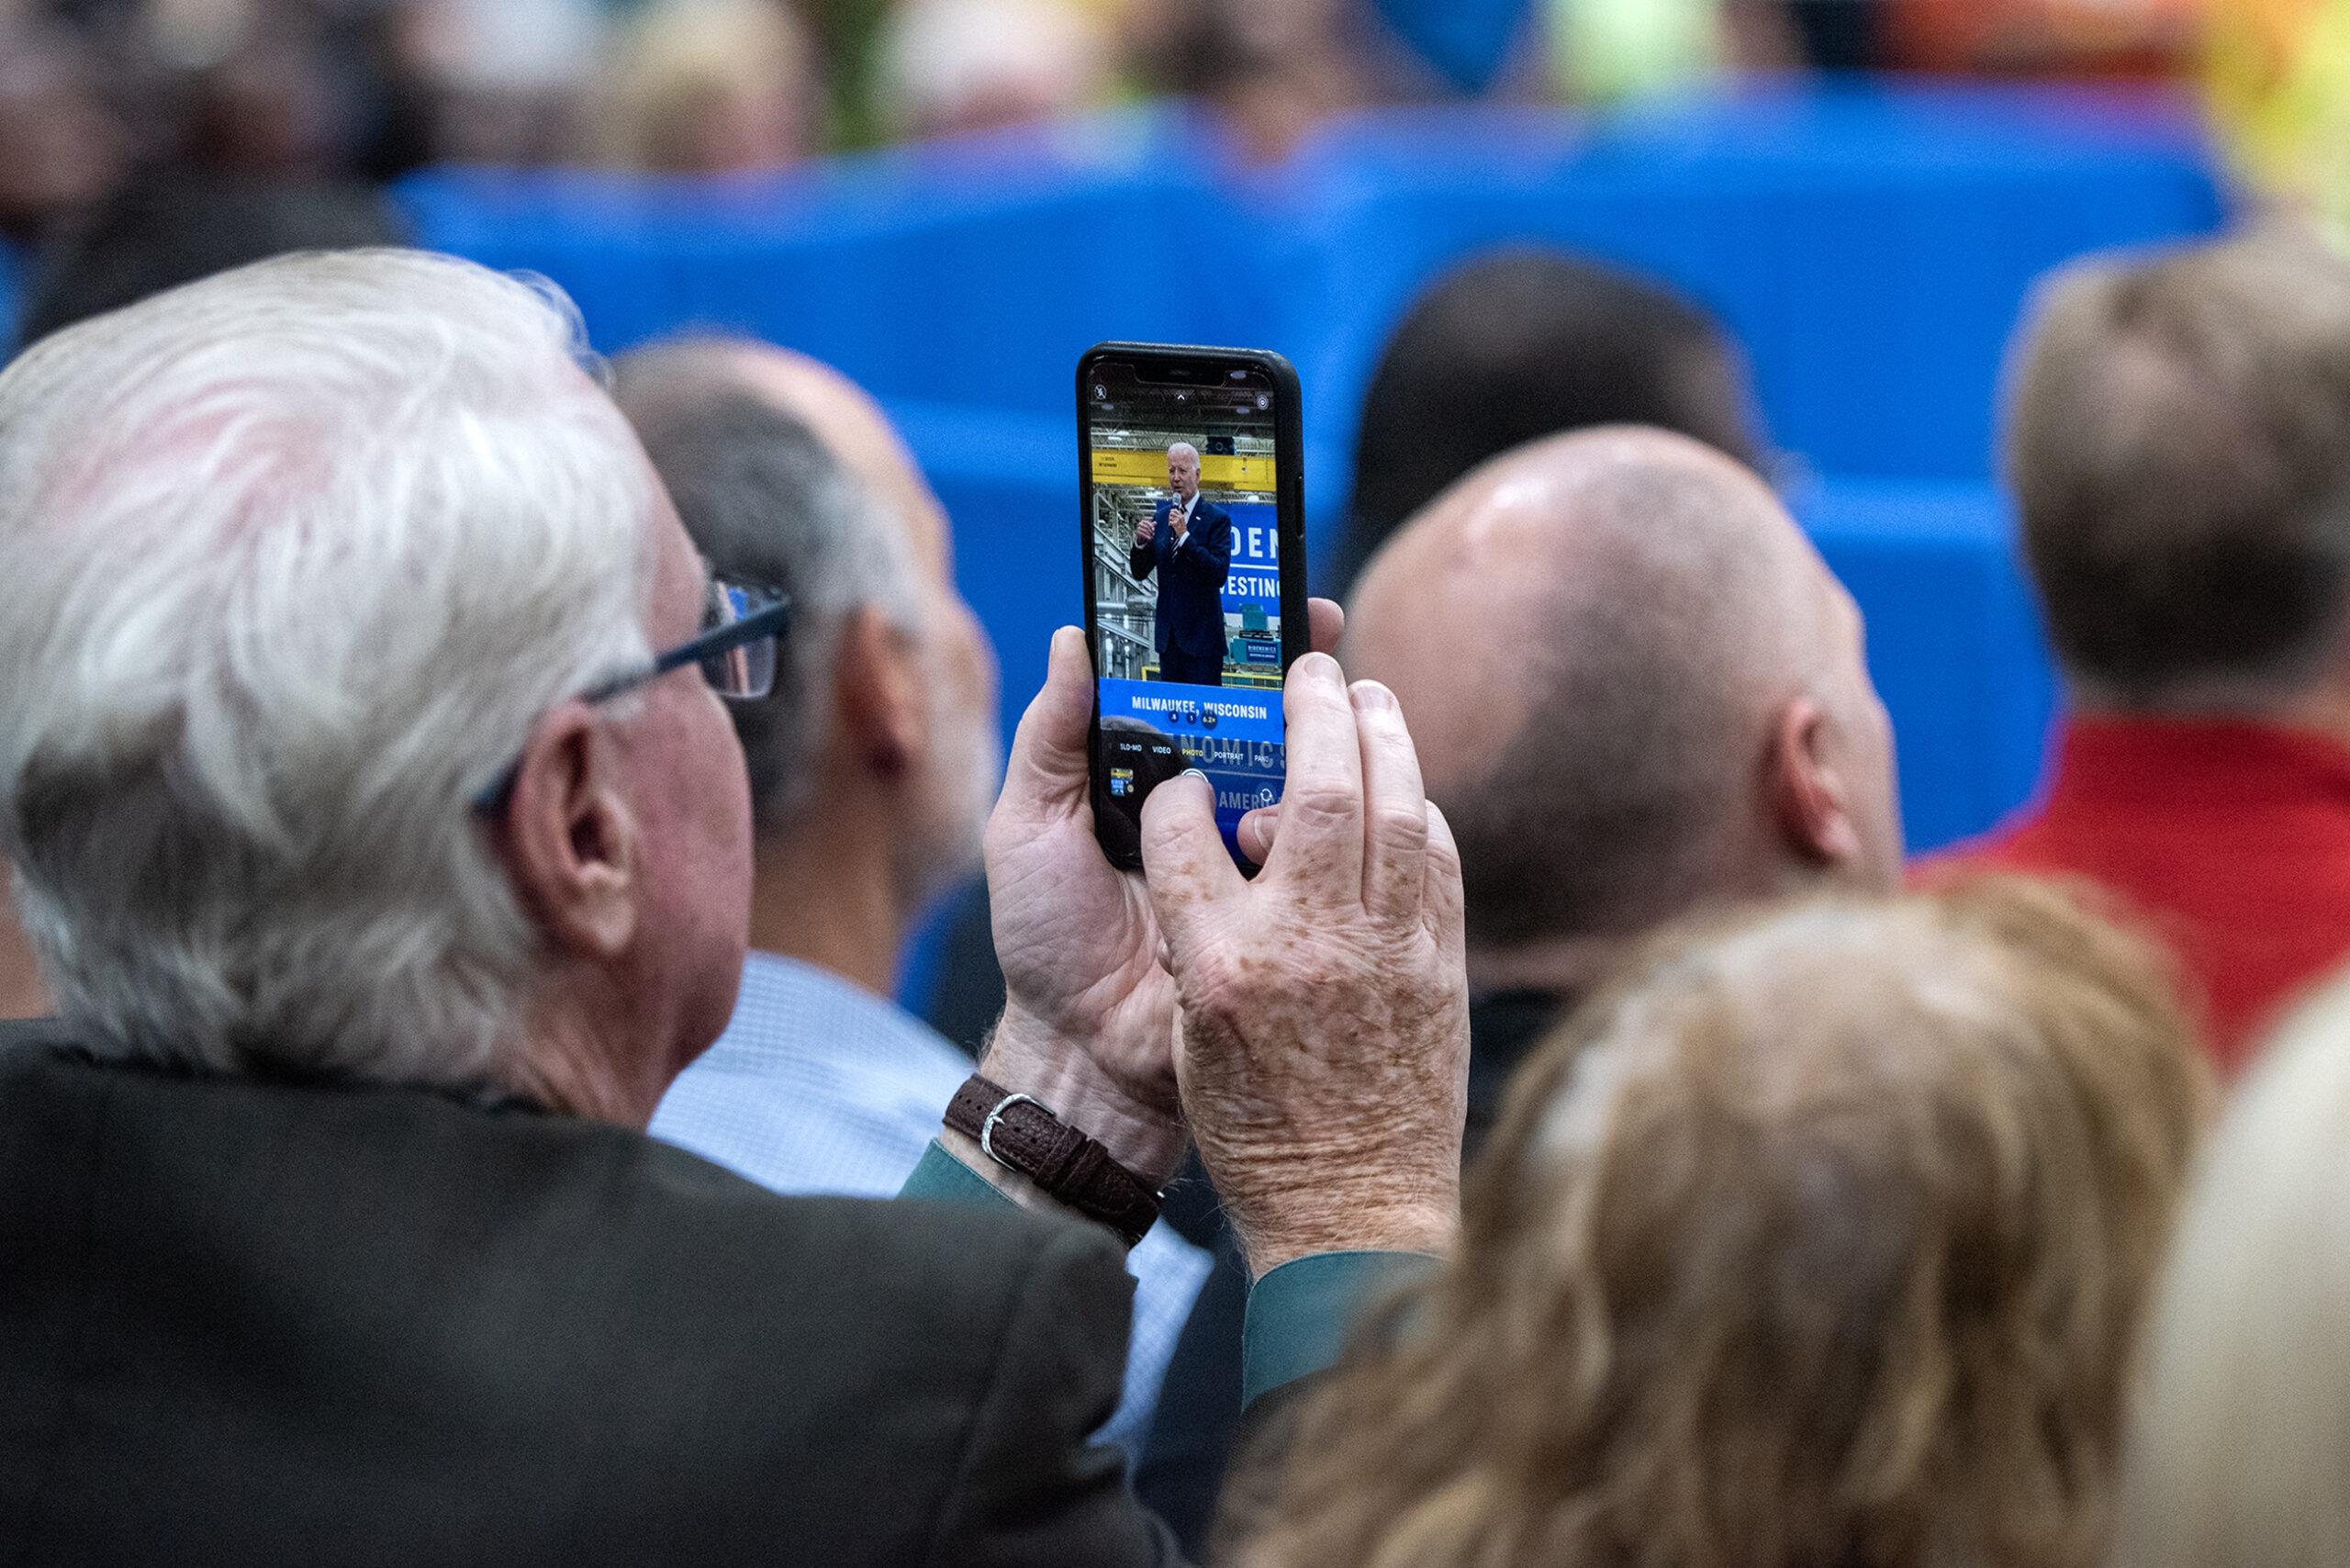 A man holds a phone while he takes a photo of President Biden, who can be seen on his screen.